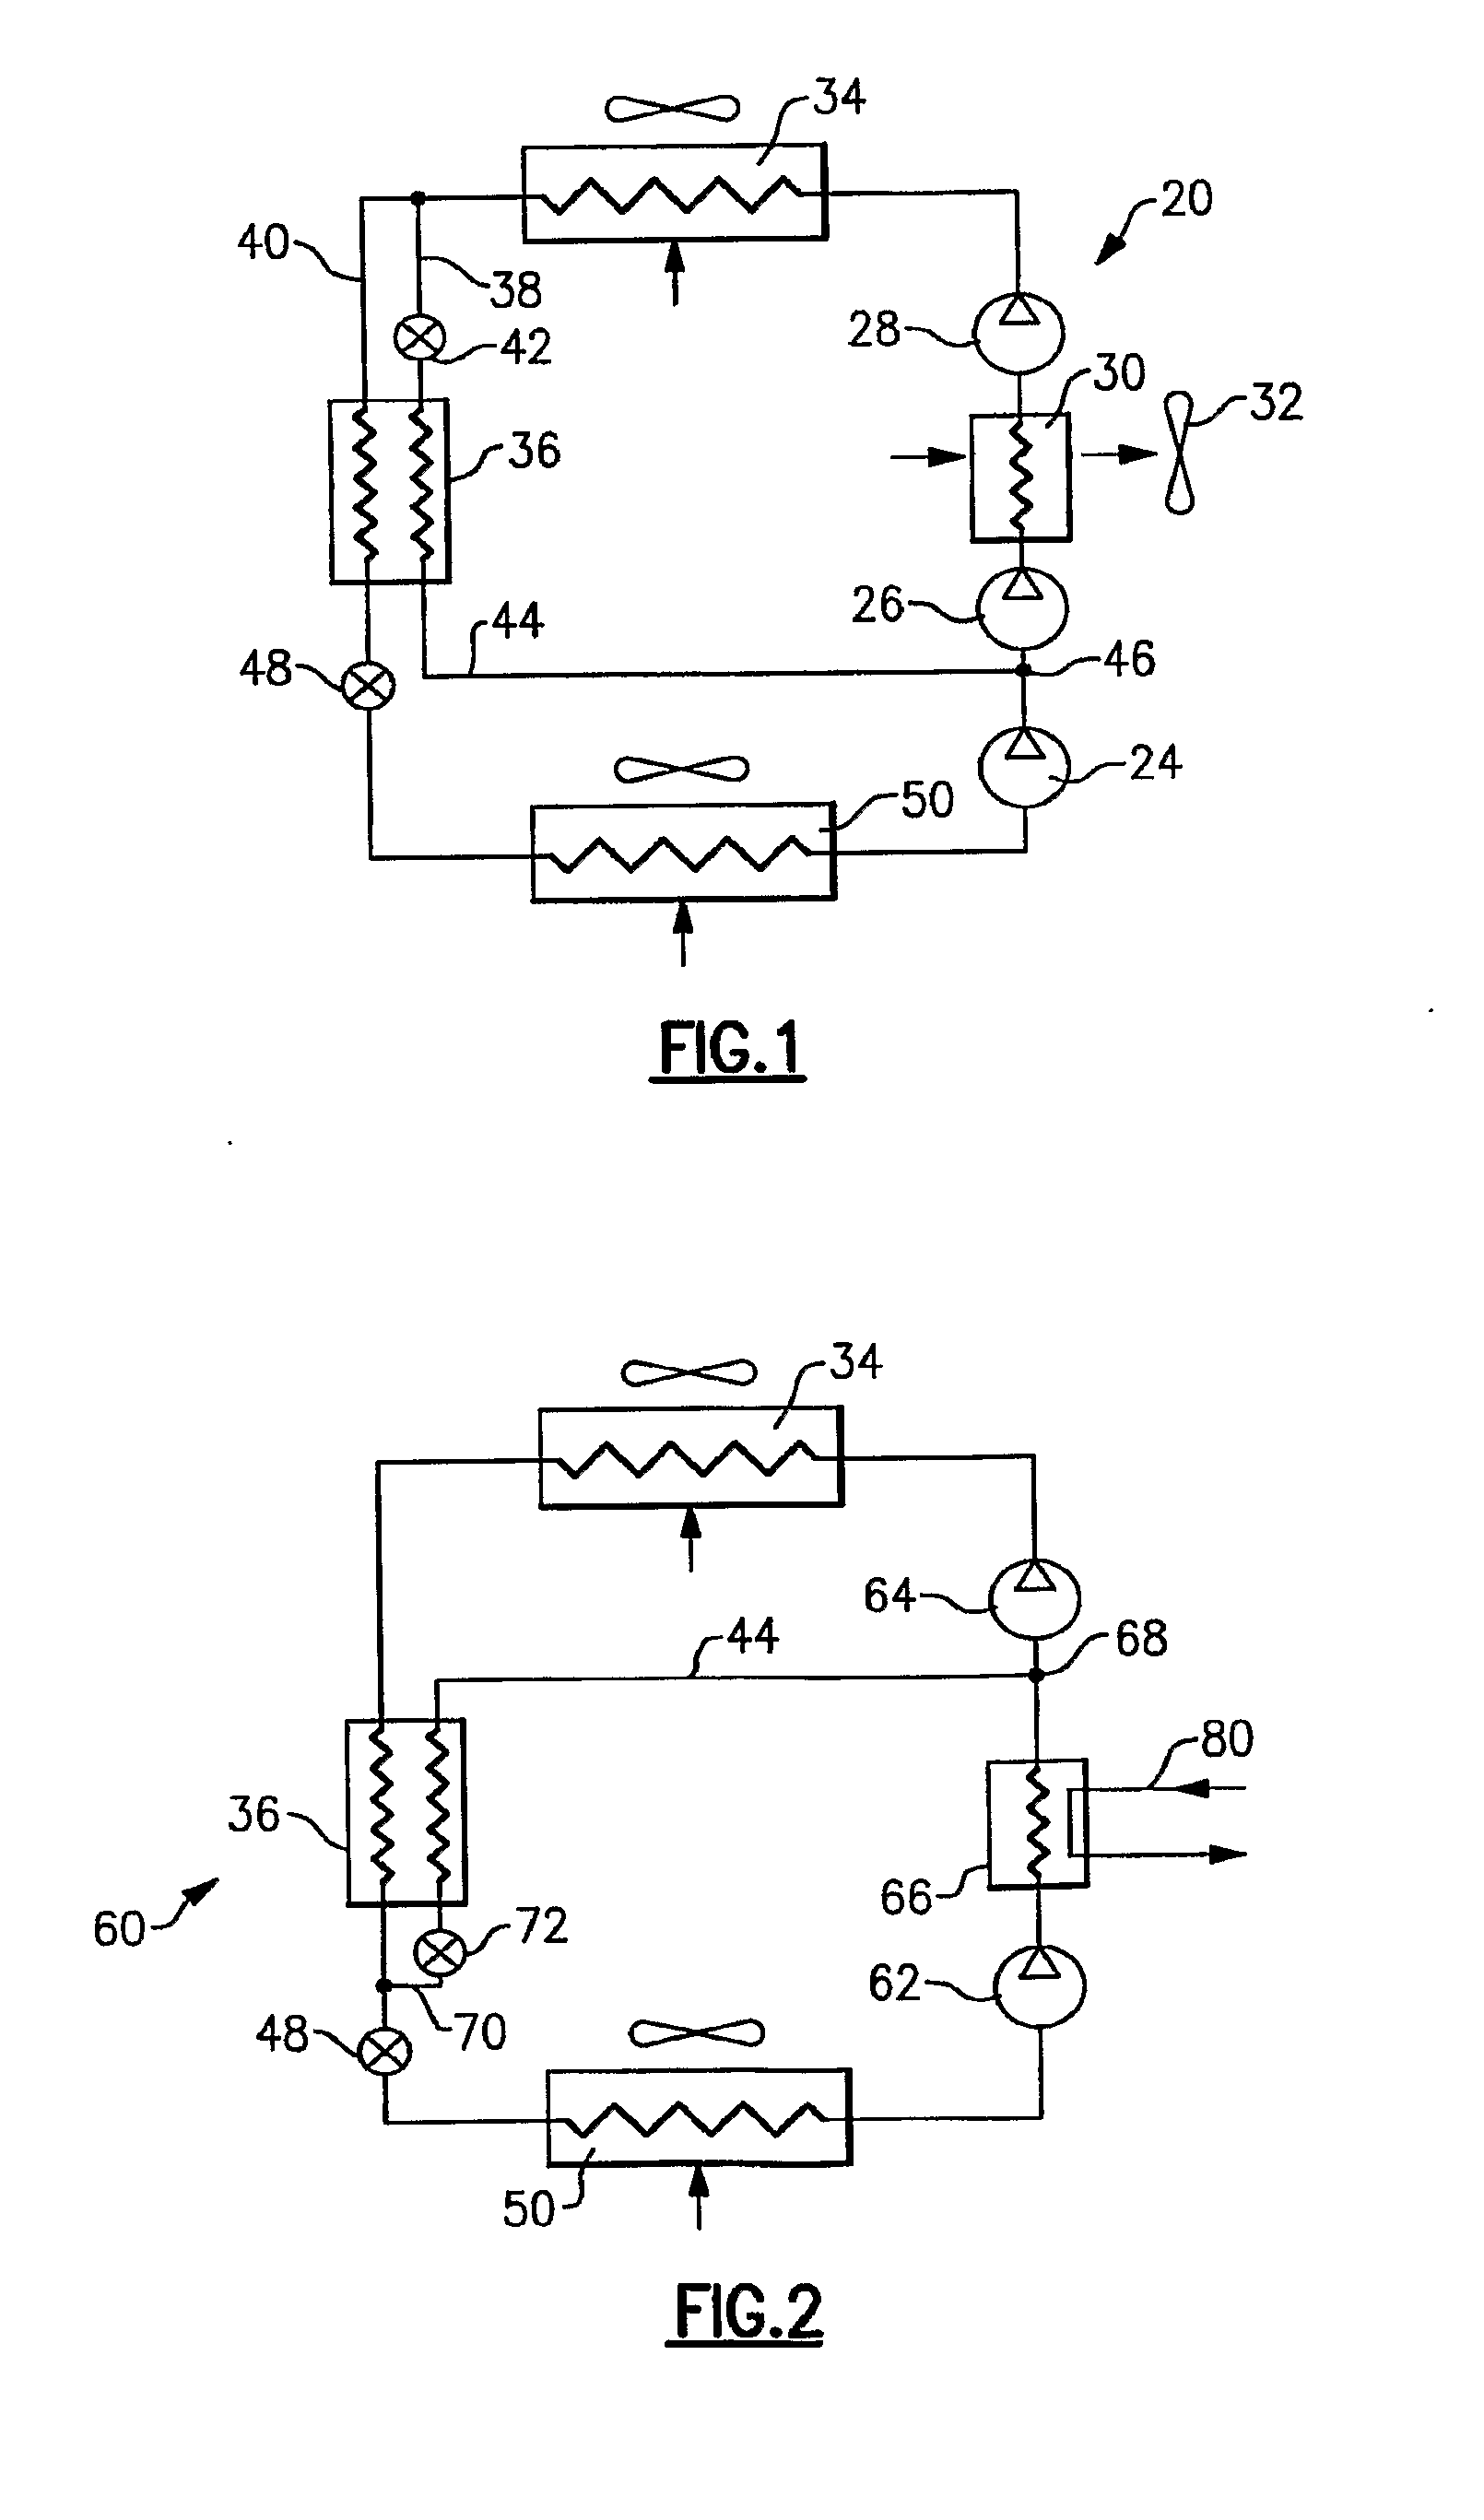 Refrigerant system with economizer, intercooler and multi-stage compressor